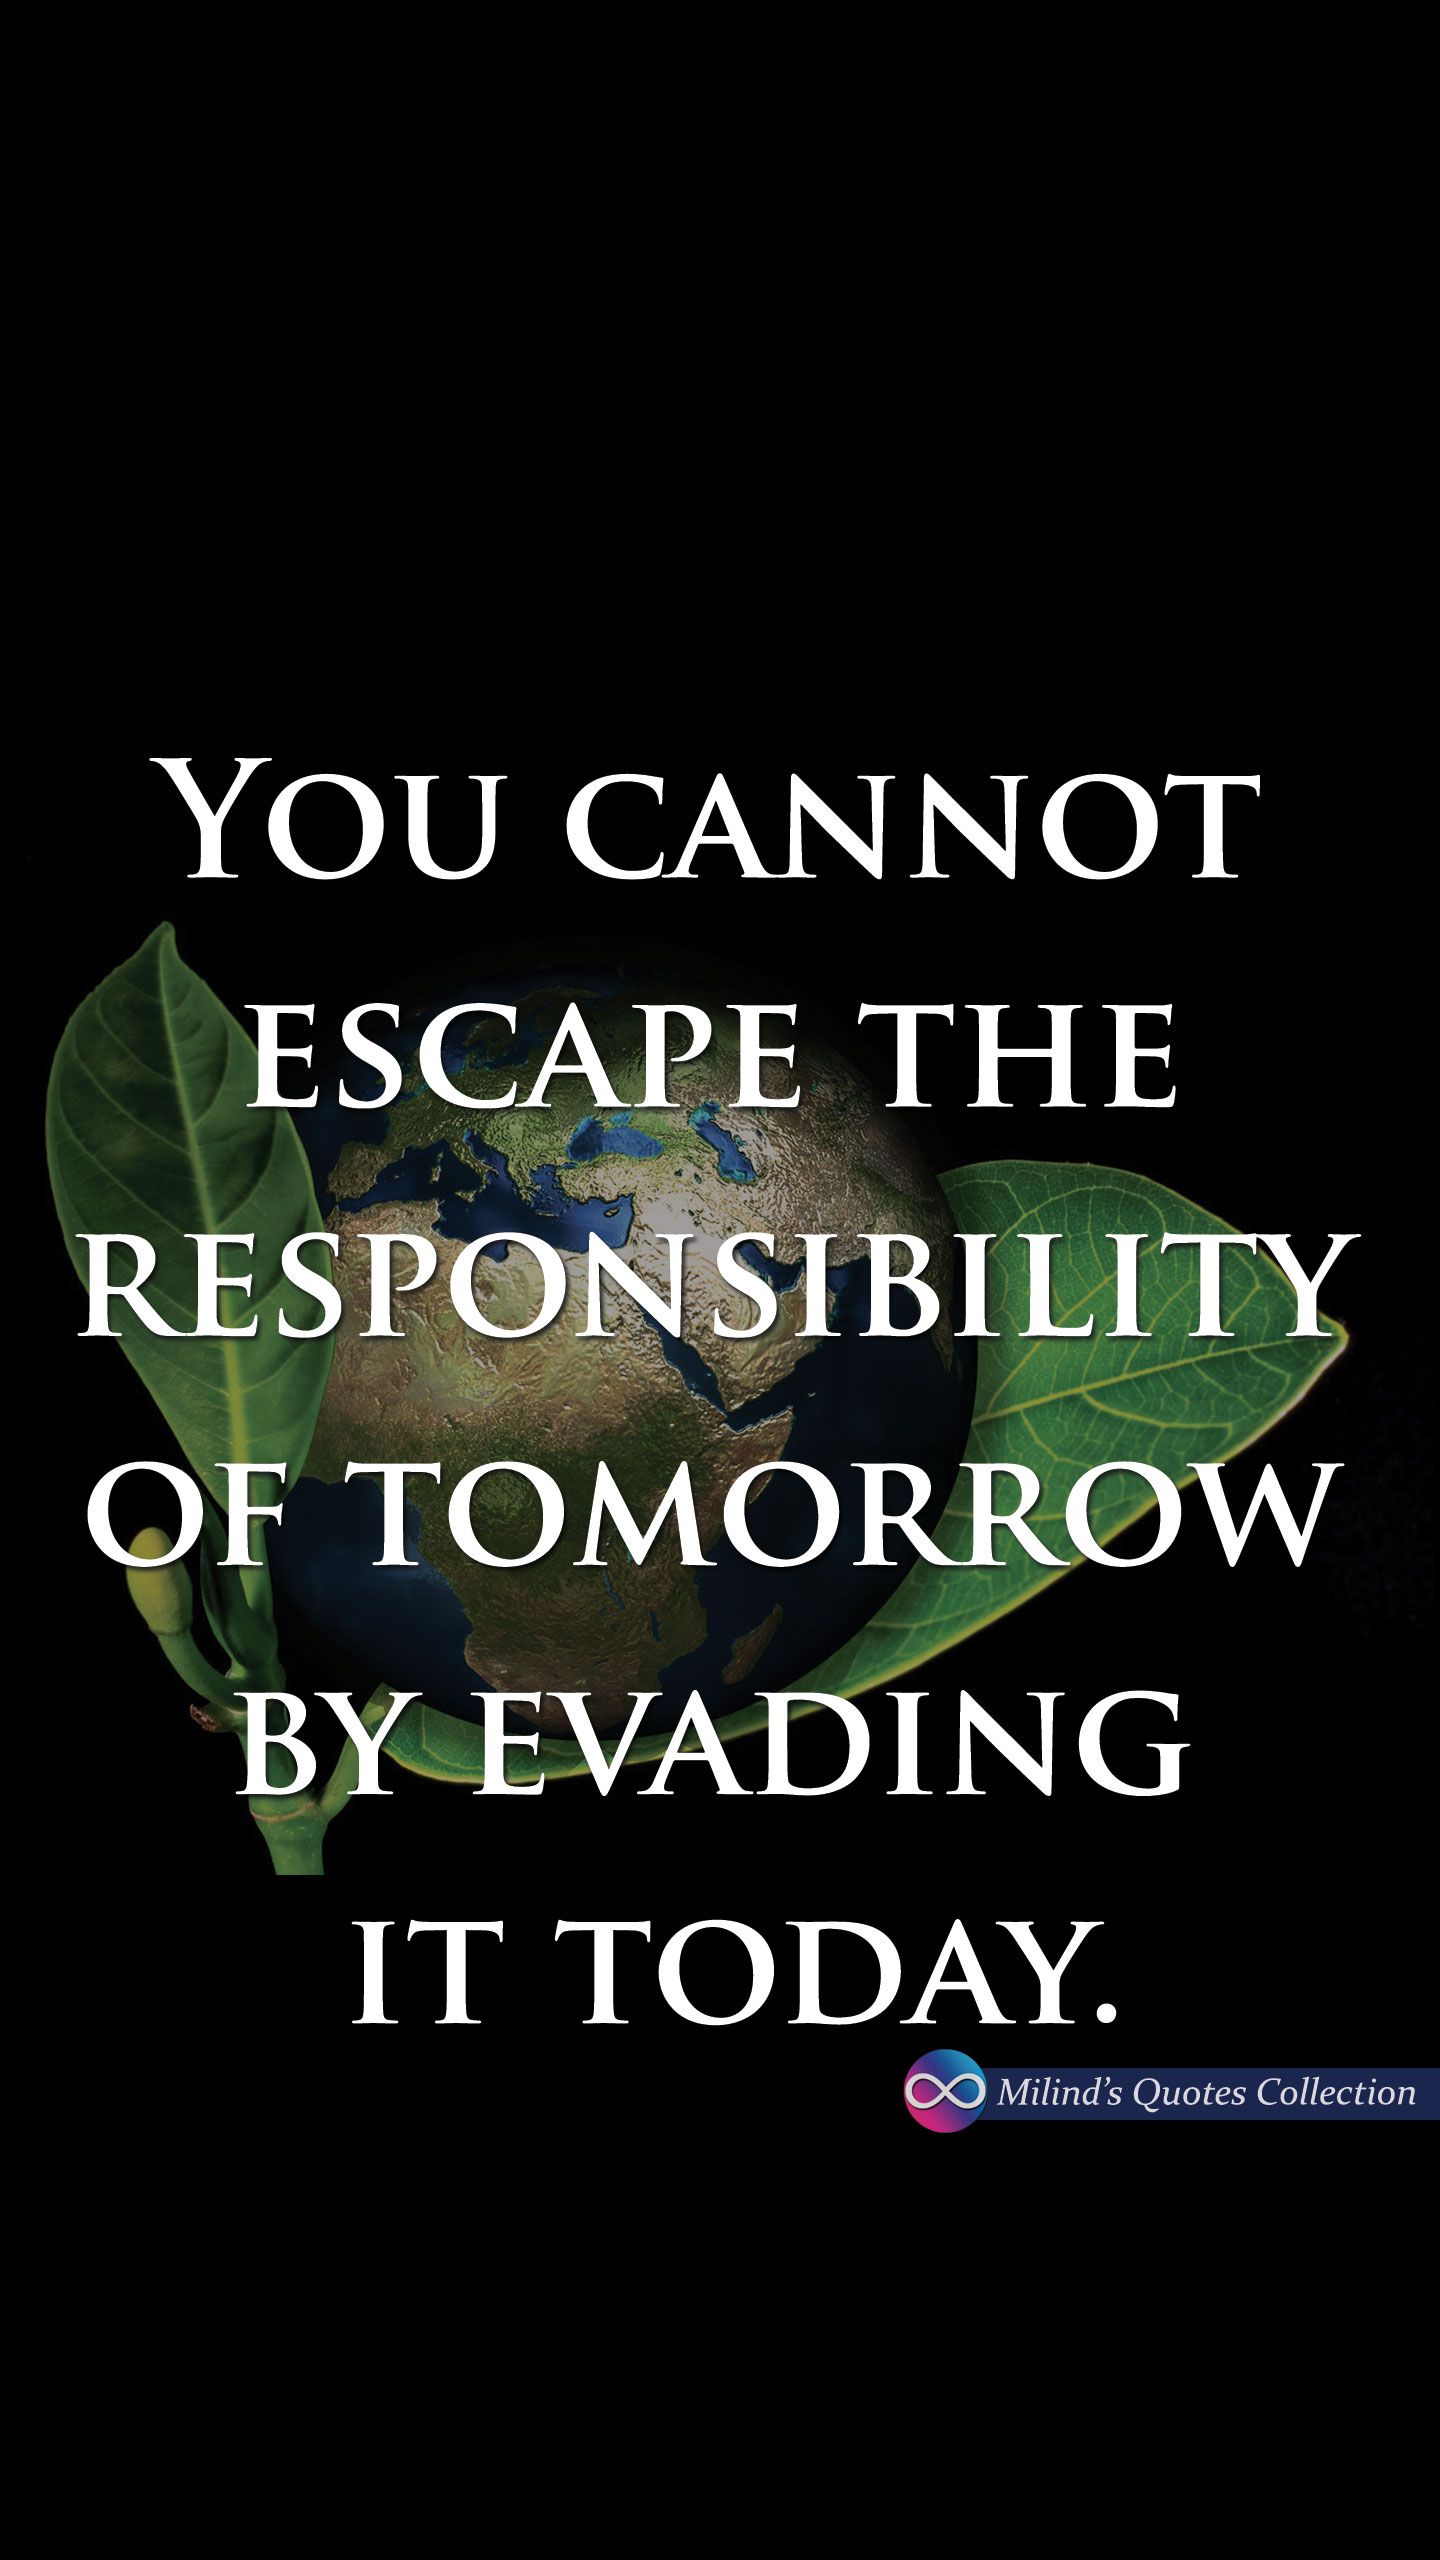 You cannot #escape the #responsibility of #tomorrow by #evading it today. #MilindsQuotesCollection #Quotes #Wallpaper #Pic. Quotes, Wallpaper quotes, No response